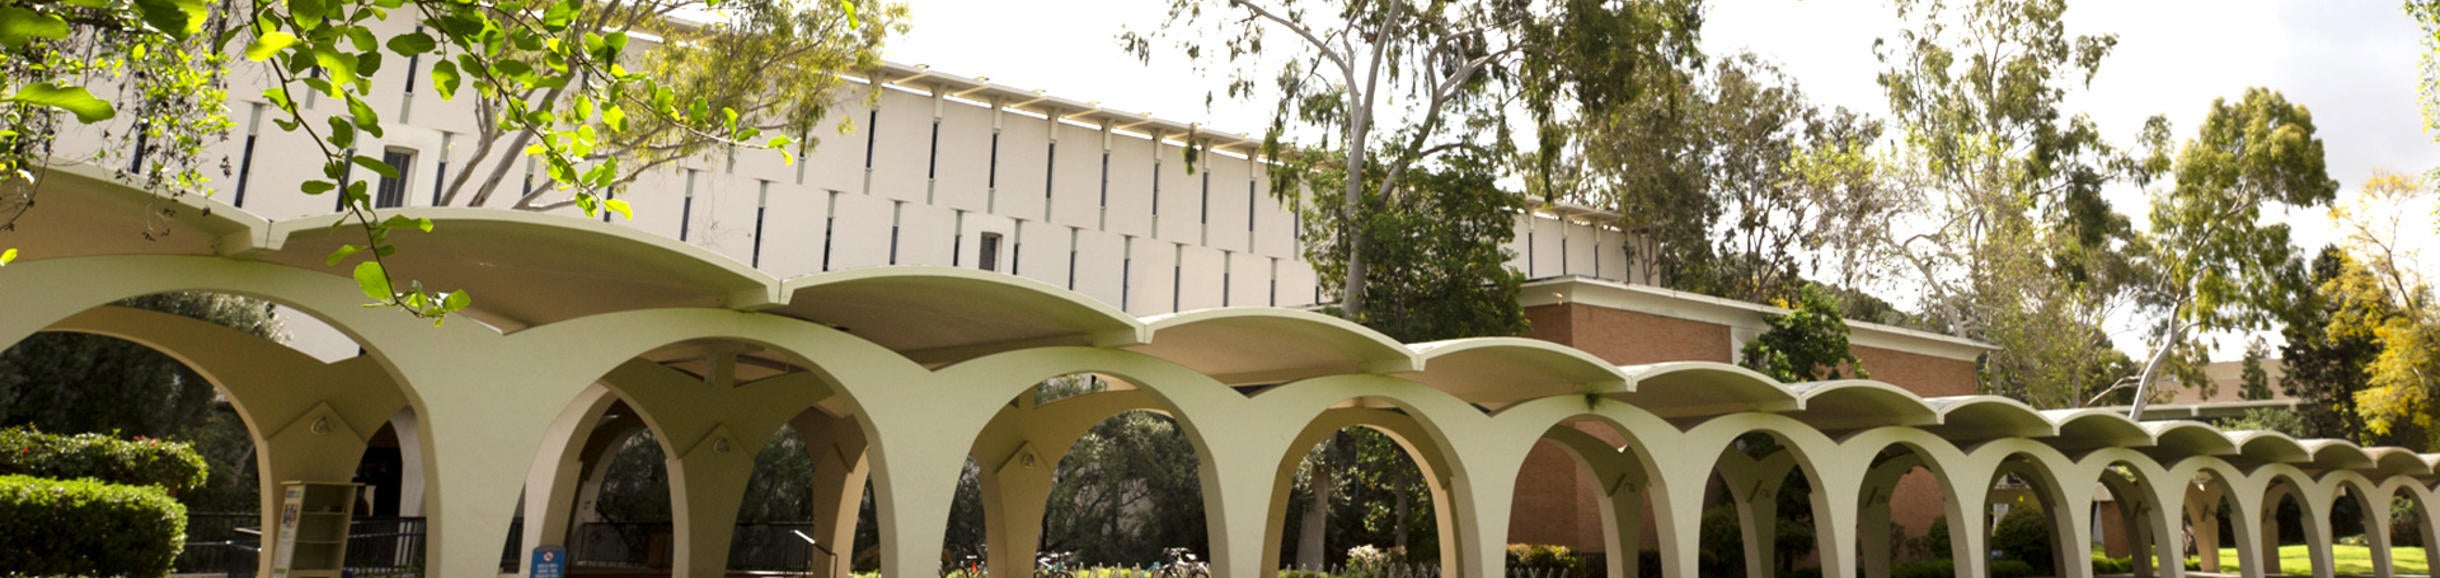 The arches of the Rivera Library on the UC Riverside Campus